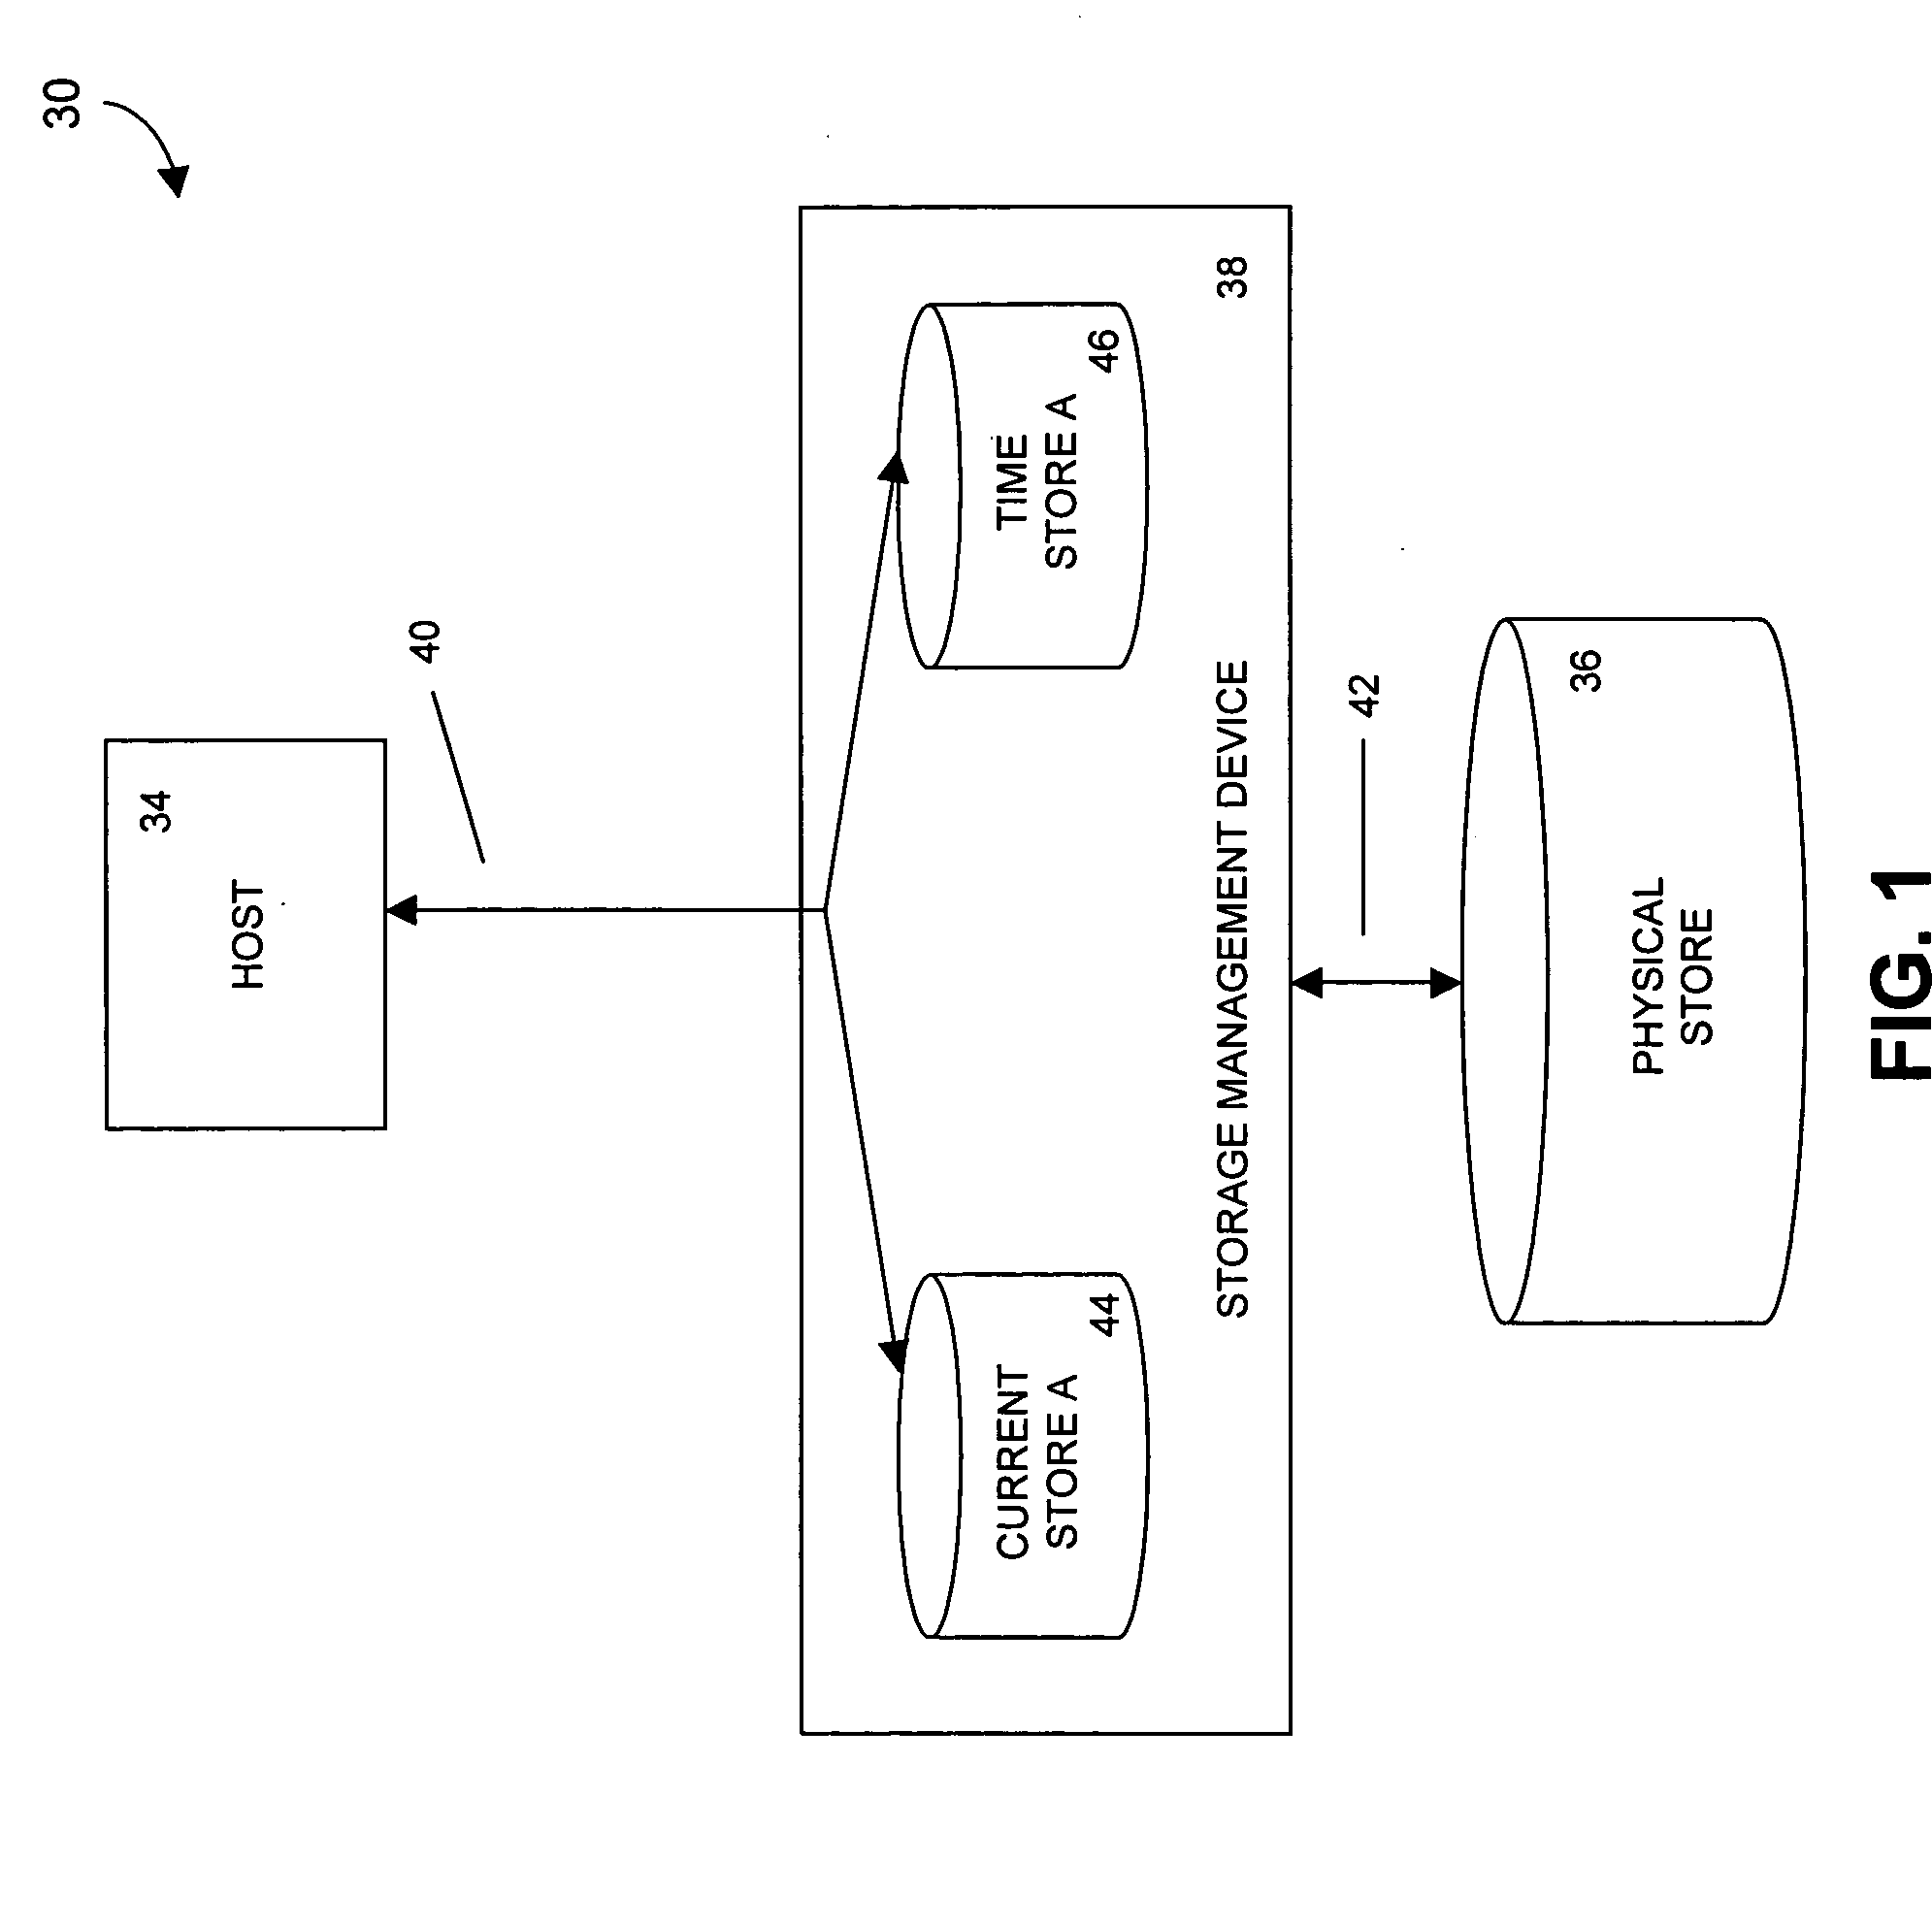 Systems and methods for time dependent data storage and recovery